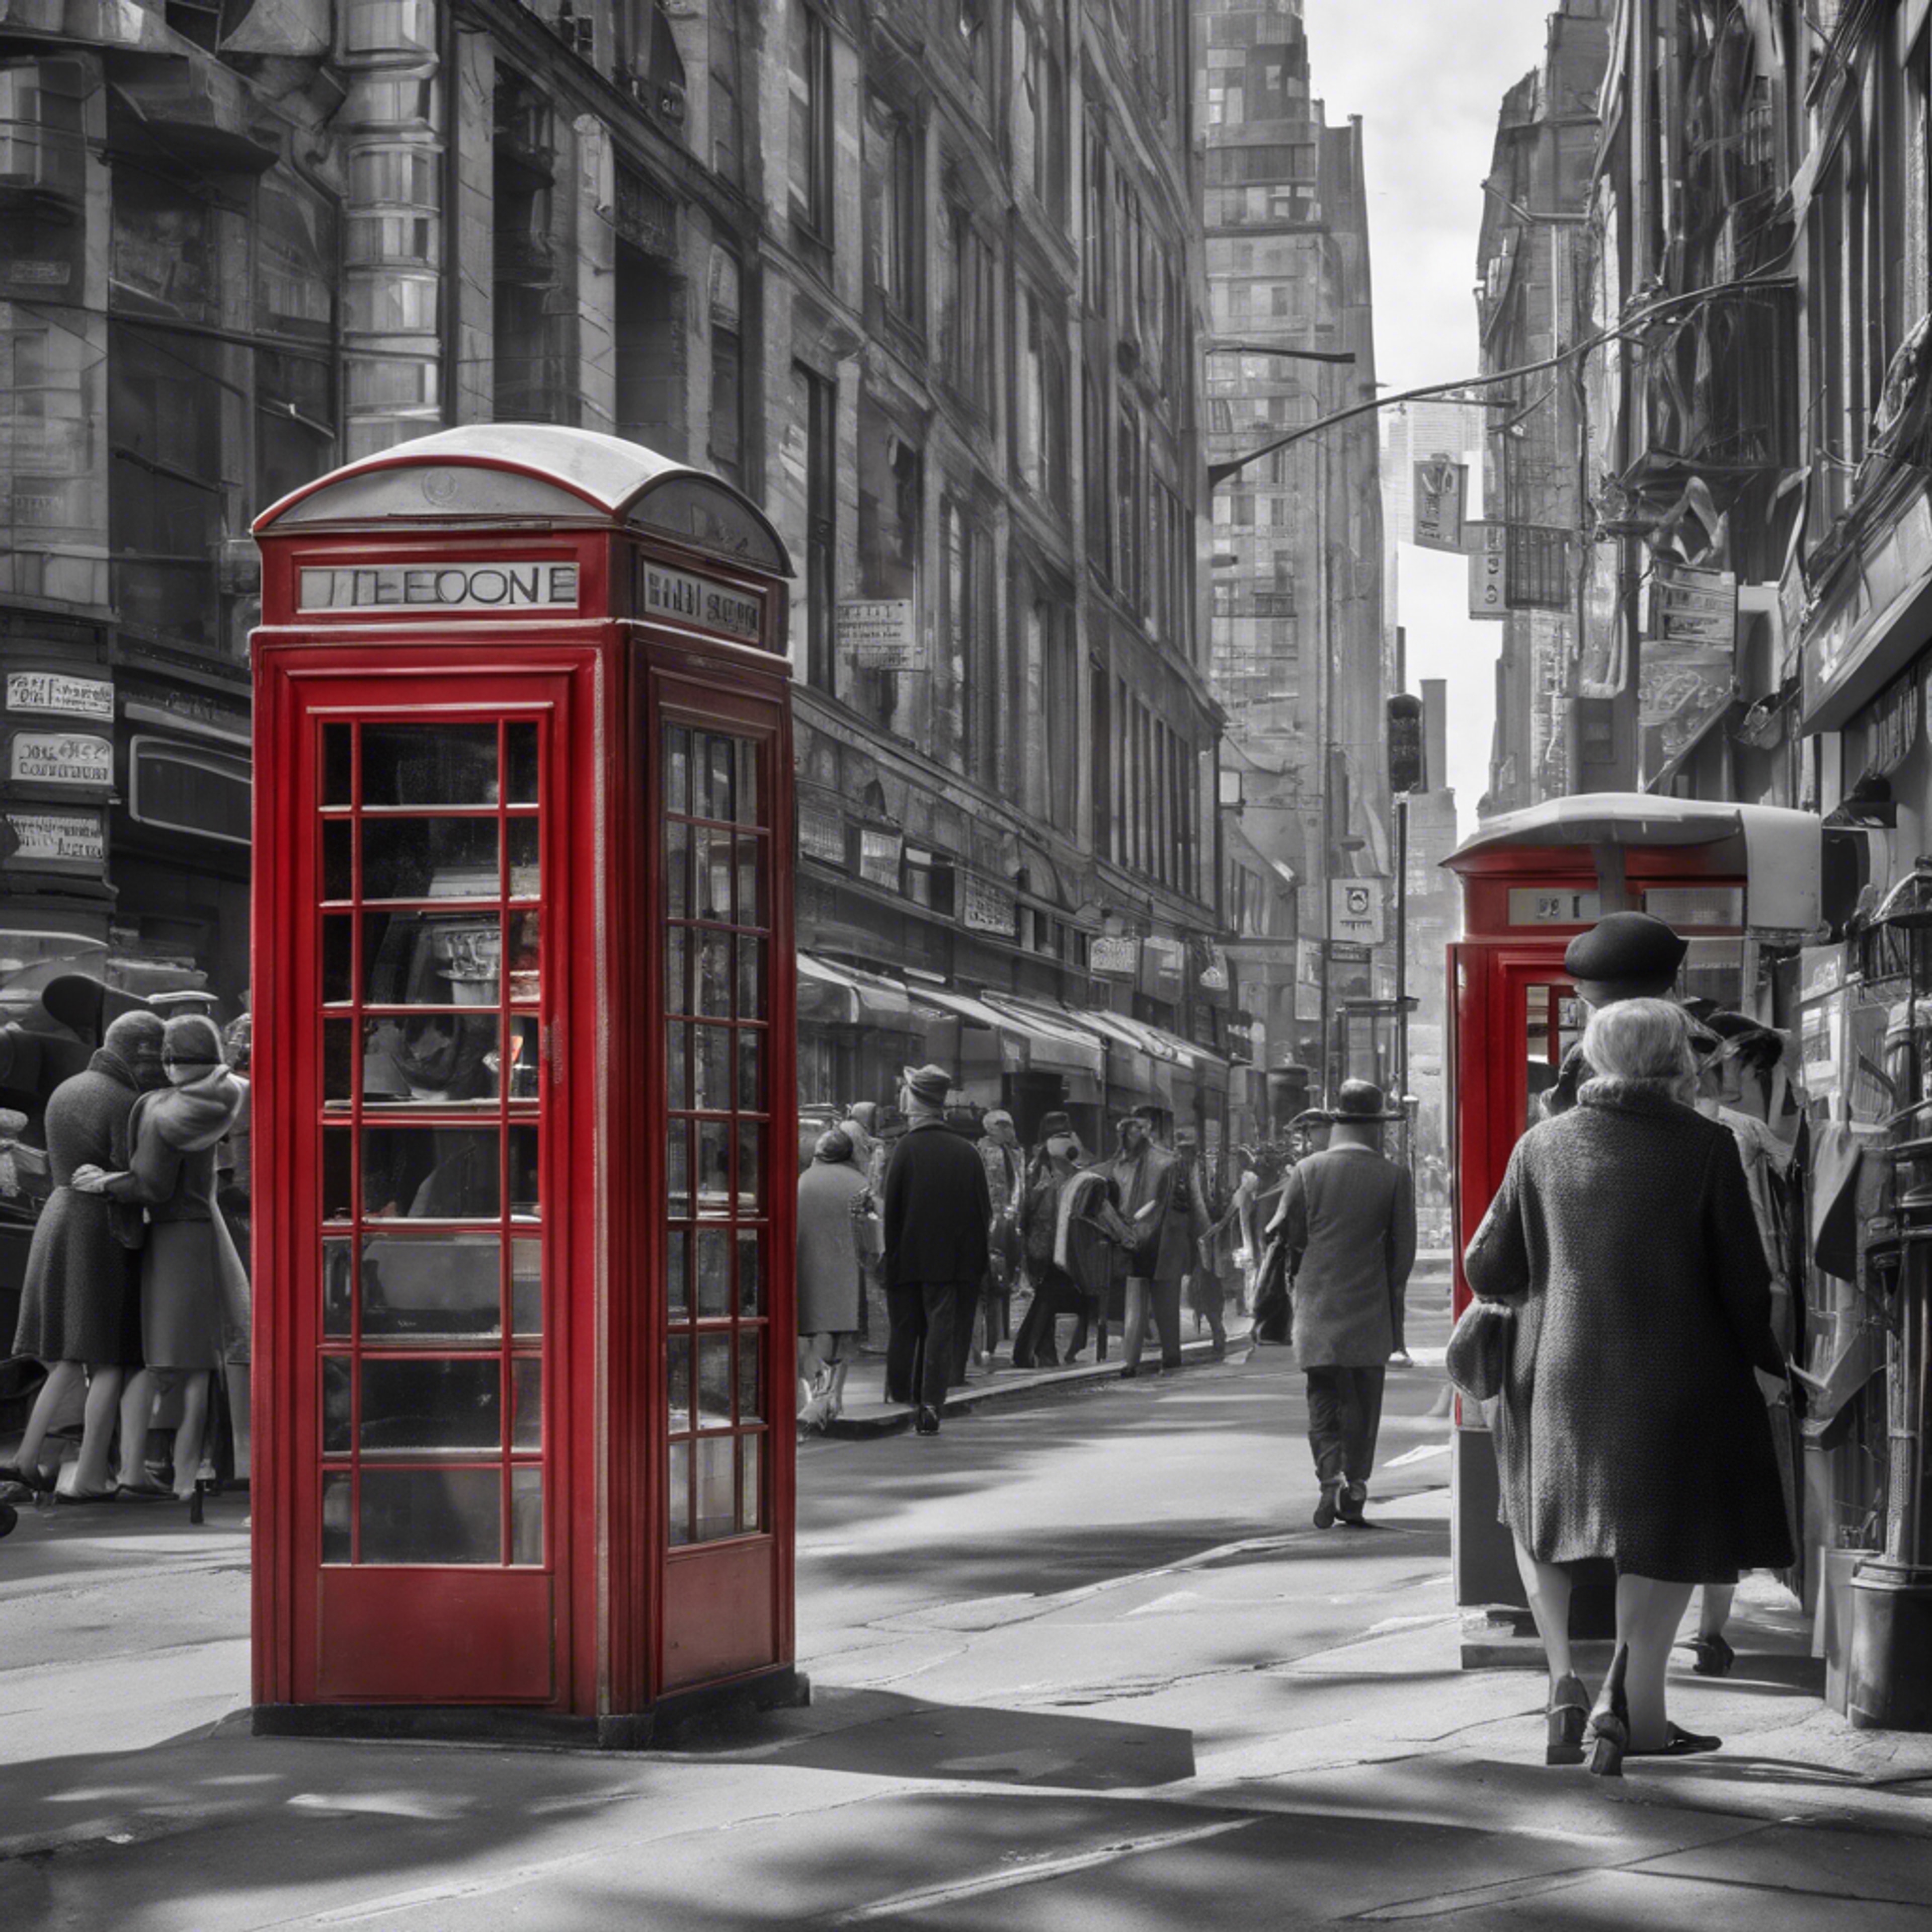 A black and white picture of a busy city street in the 1960s, with one characteristic iconic red phone booth. Дэлгэцийн зураг[8cad1b57085c4579b492]